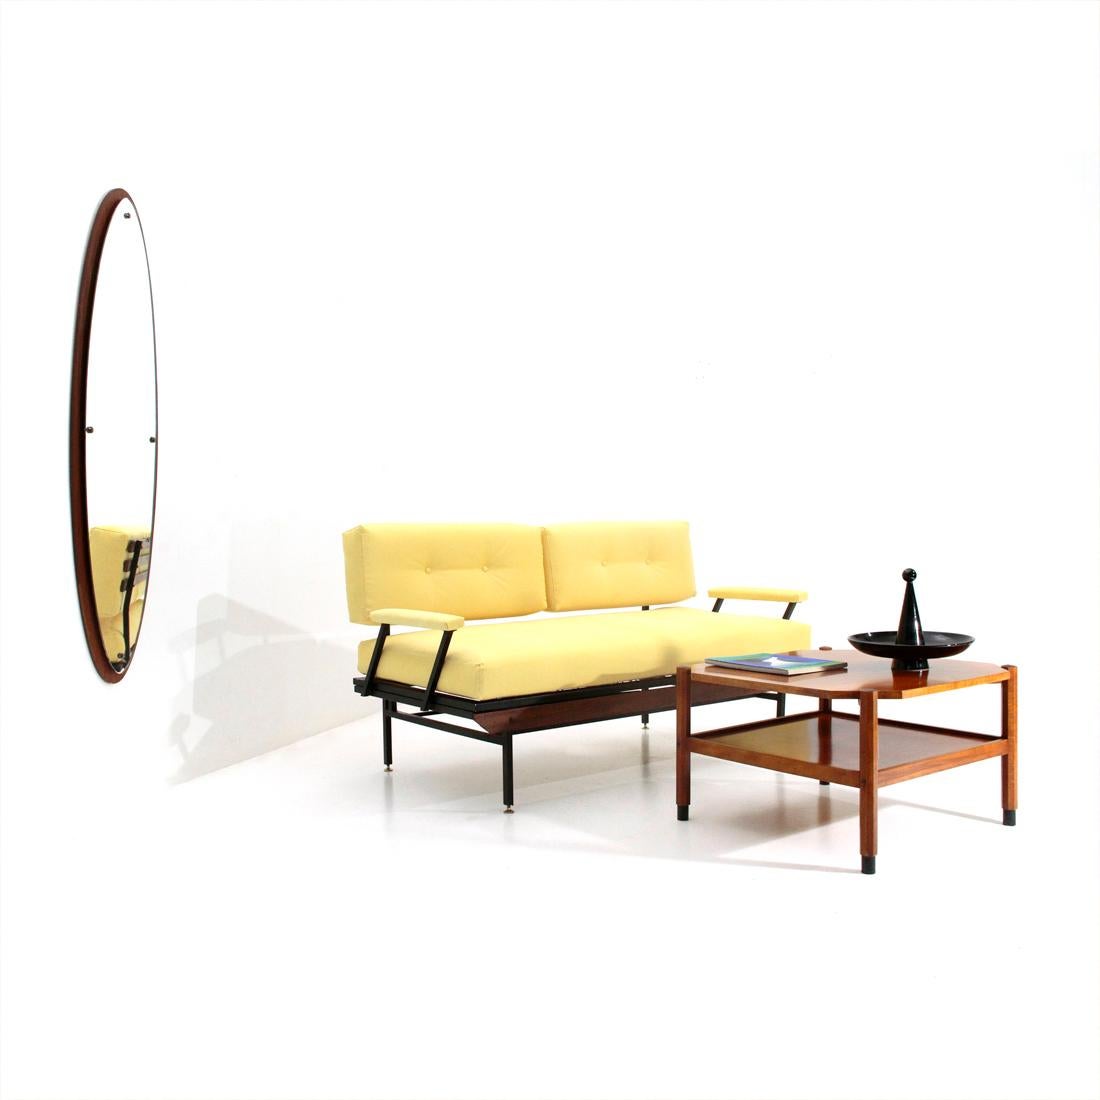 Italian Midcentury Sofa Bed in Yellow Fabric, 1950s For Sale 5